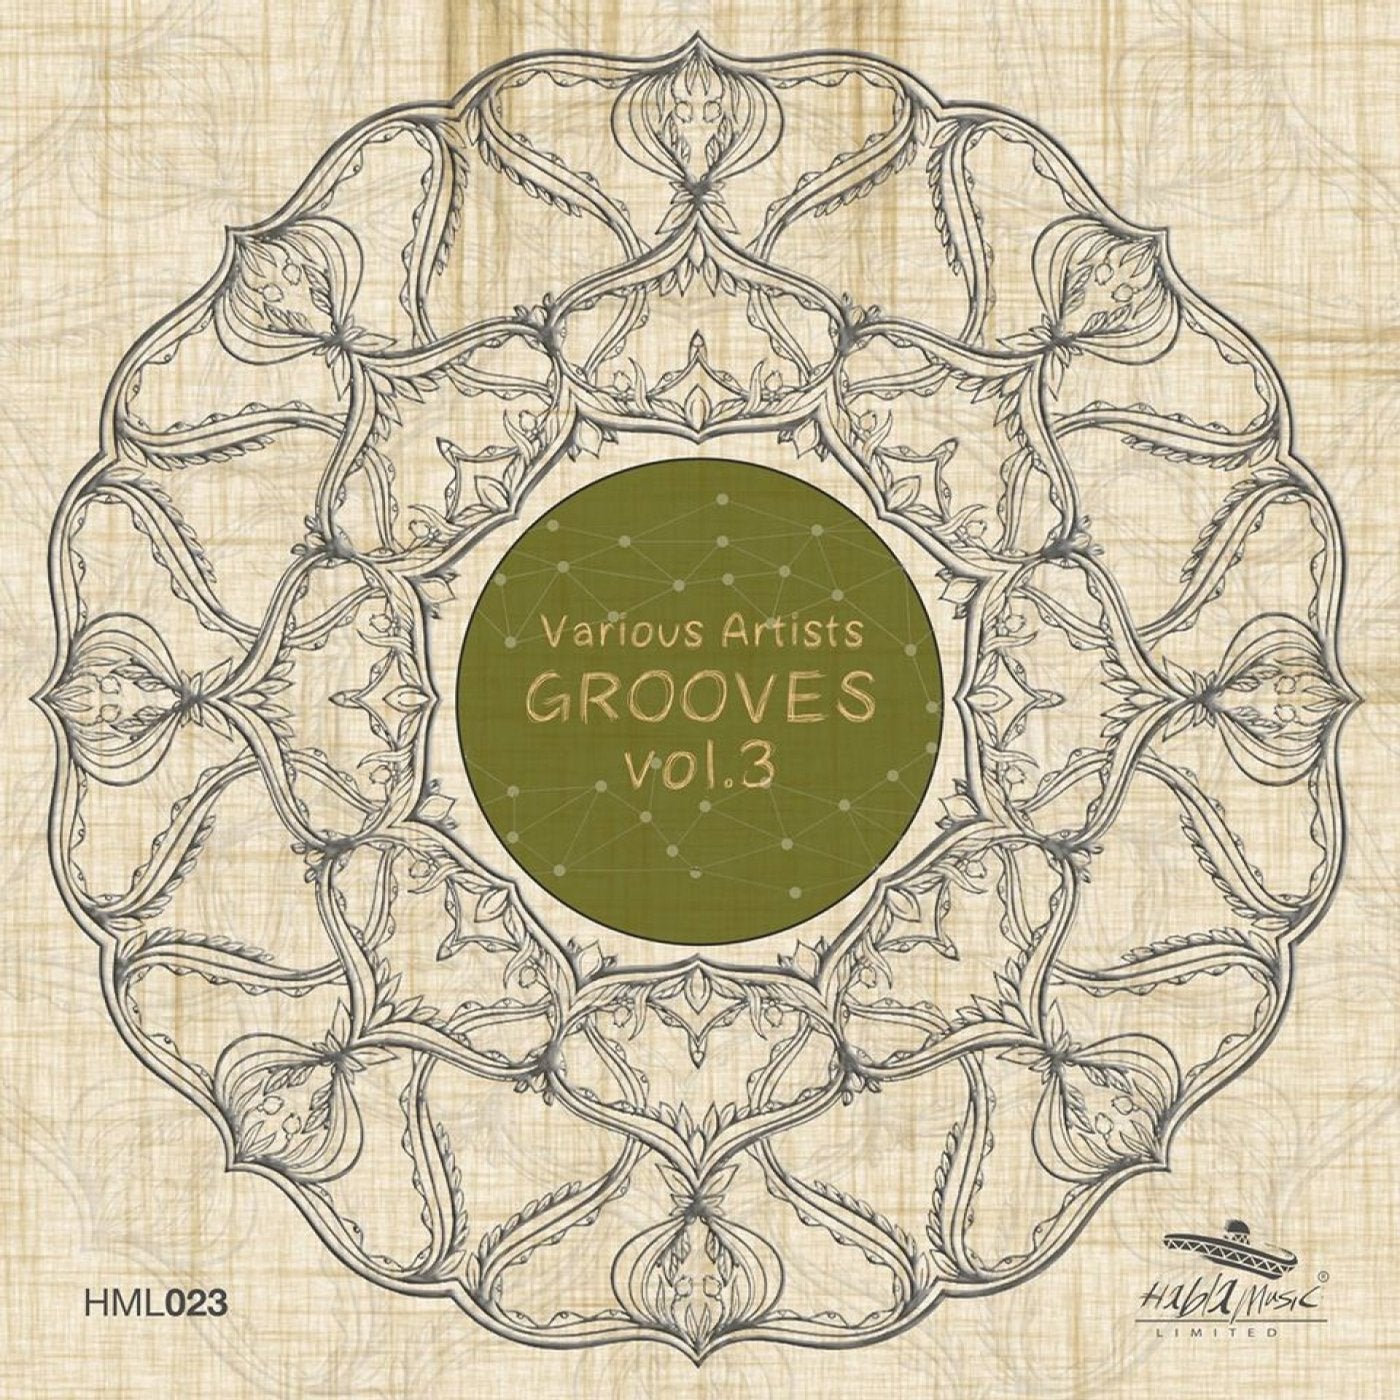 Grooves vol.3